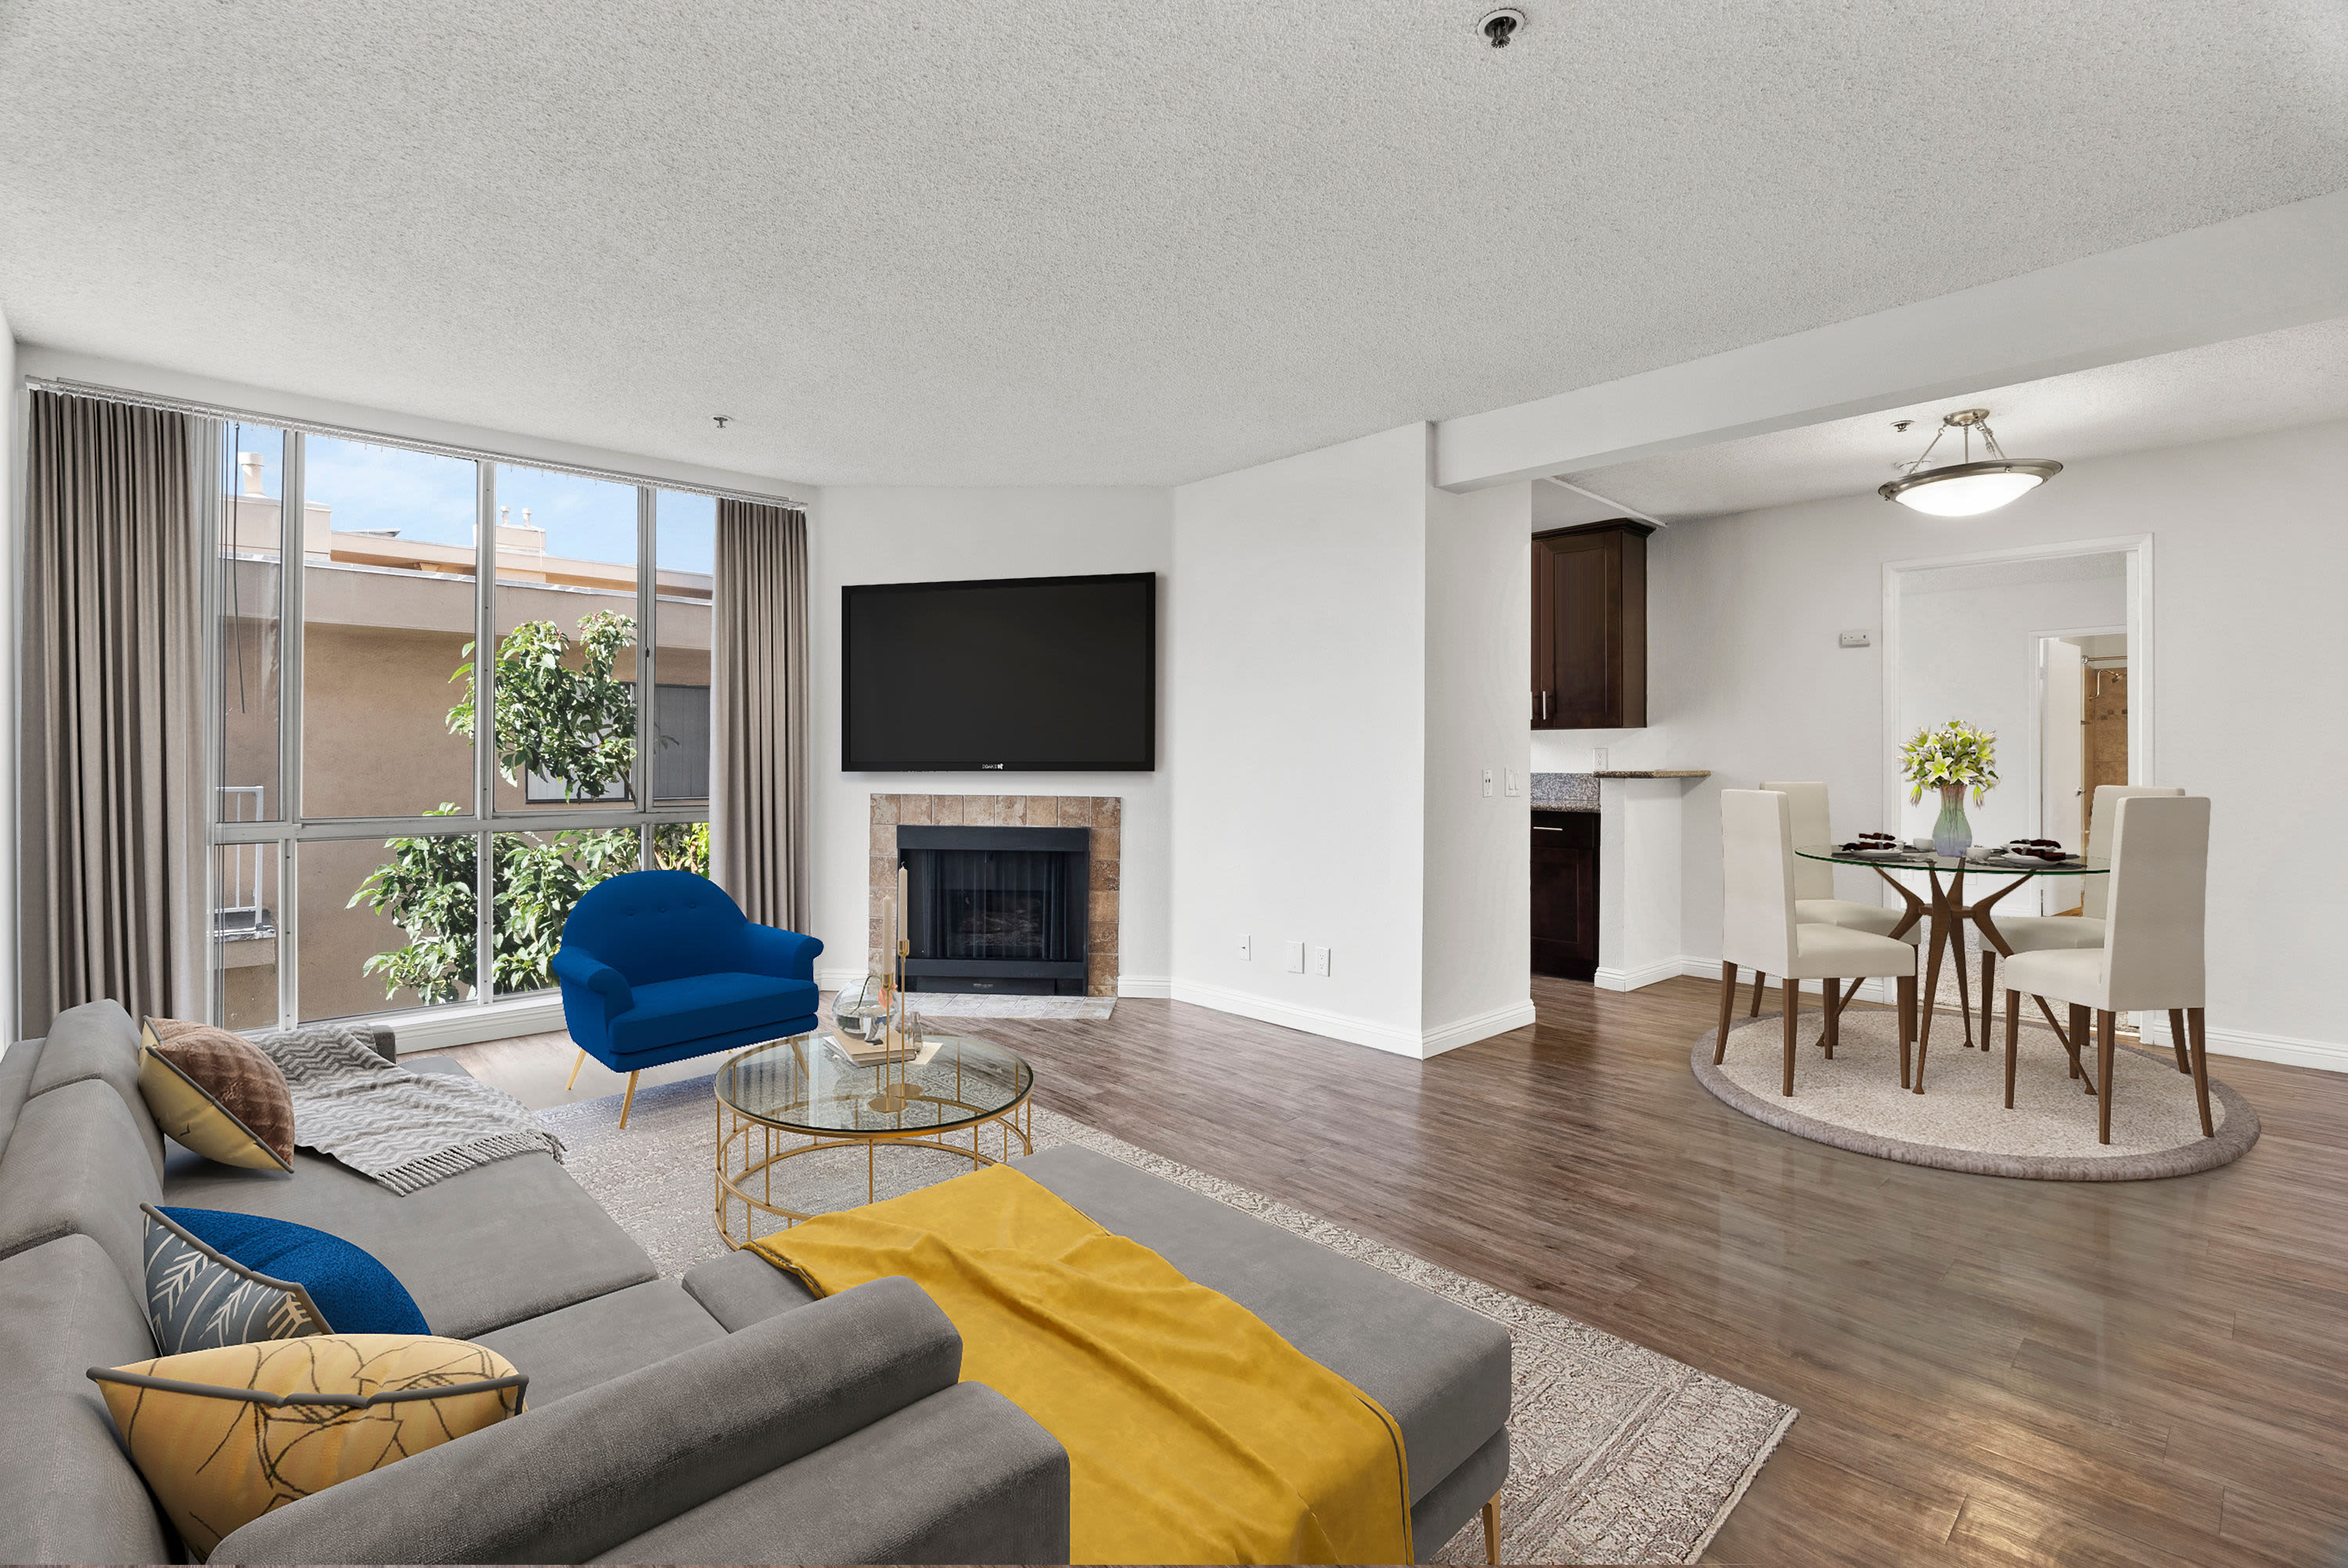 Furnished model living room at The Jessica Apartments in Los Angeles, California